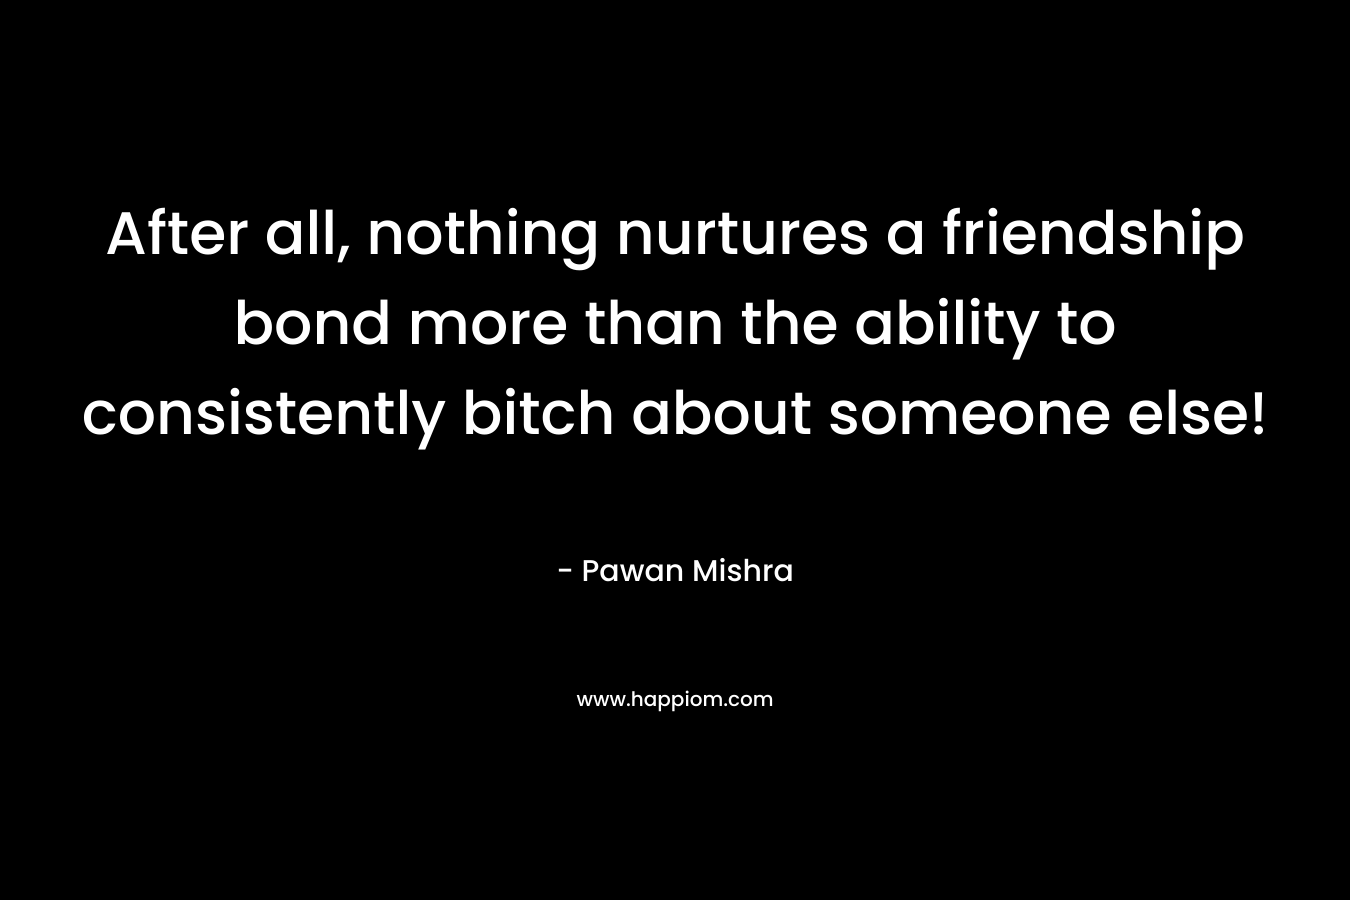 After all, nothing nurtures a friendship bond more than the ability to consistently bitch about someone else!